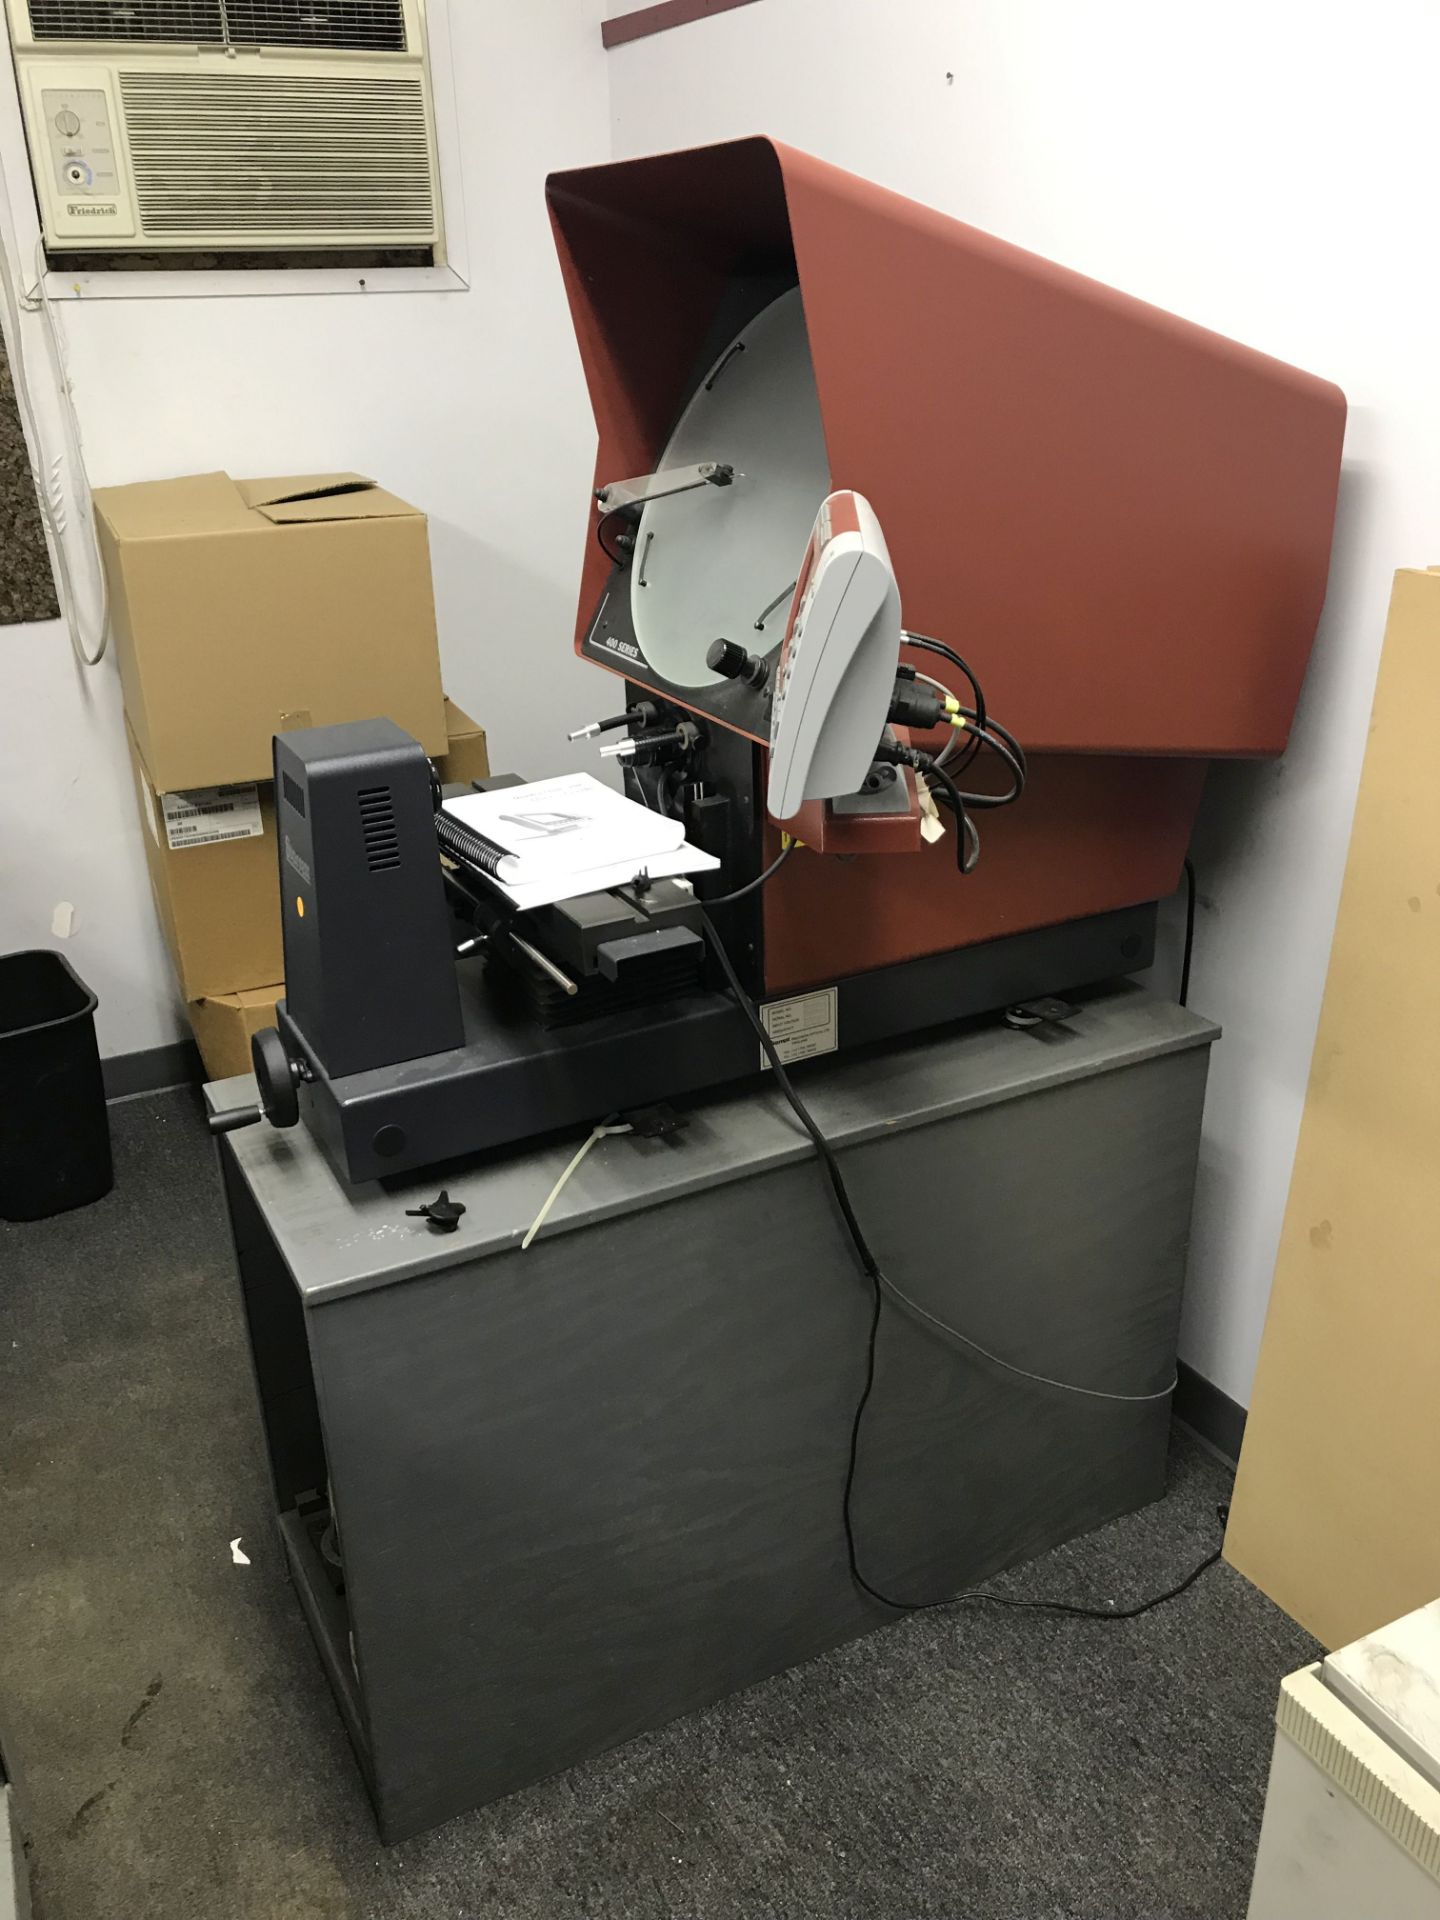 STARRETT OPTICAL COMPARATOR, SERIES 400, WITH QUADRA-CHEK 200 DIGITAL READ OUT CONTROL PANEL [ - Image 2 of 6